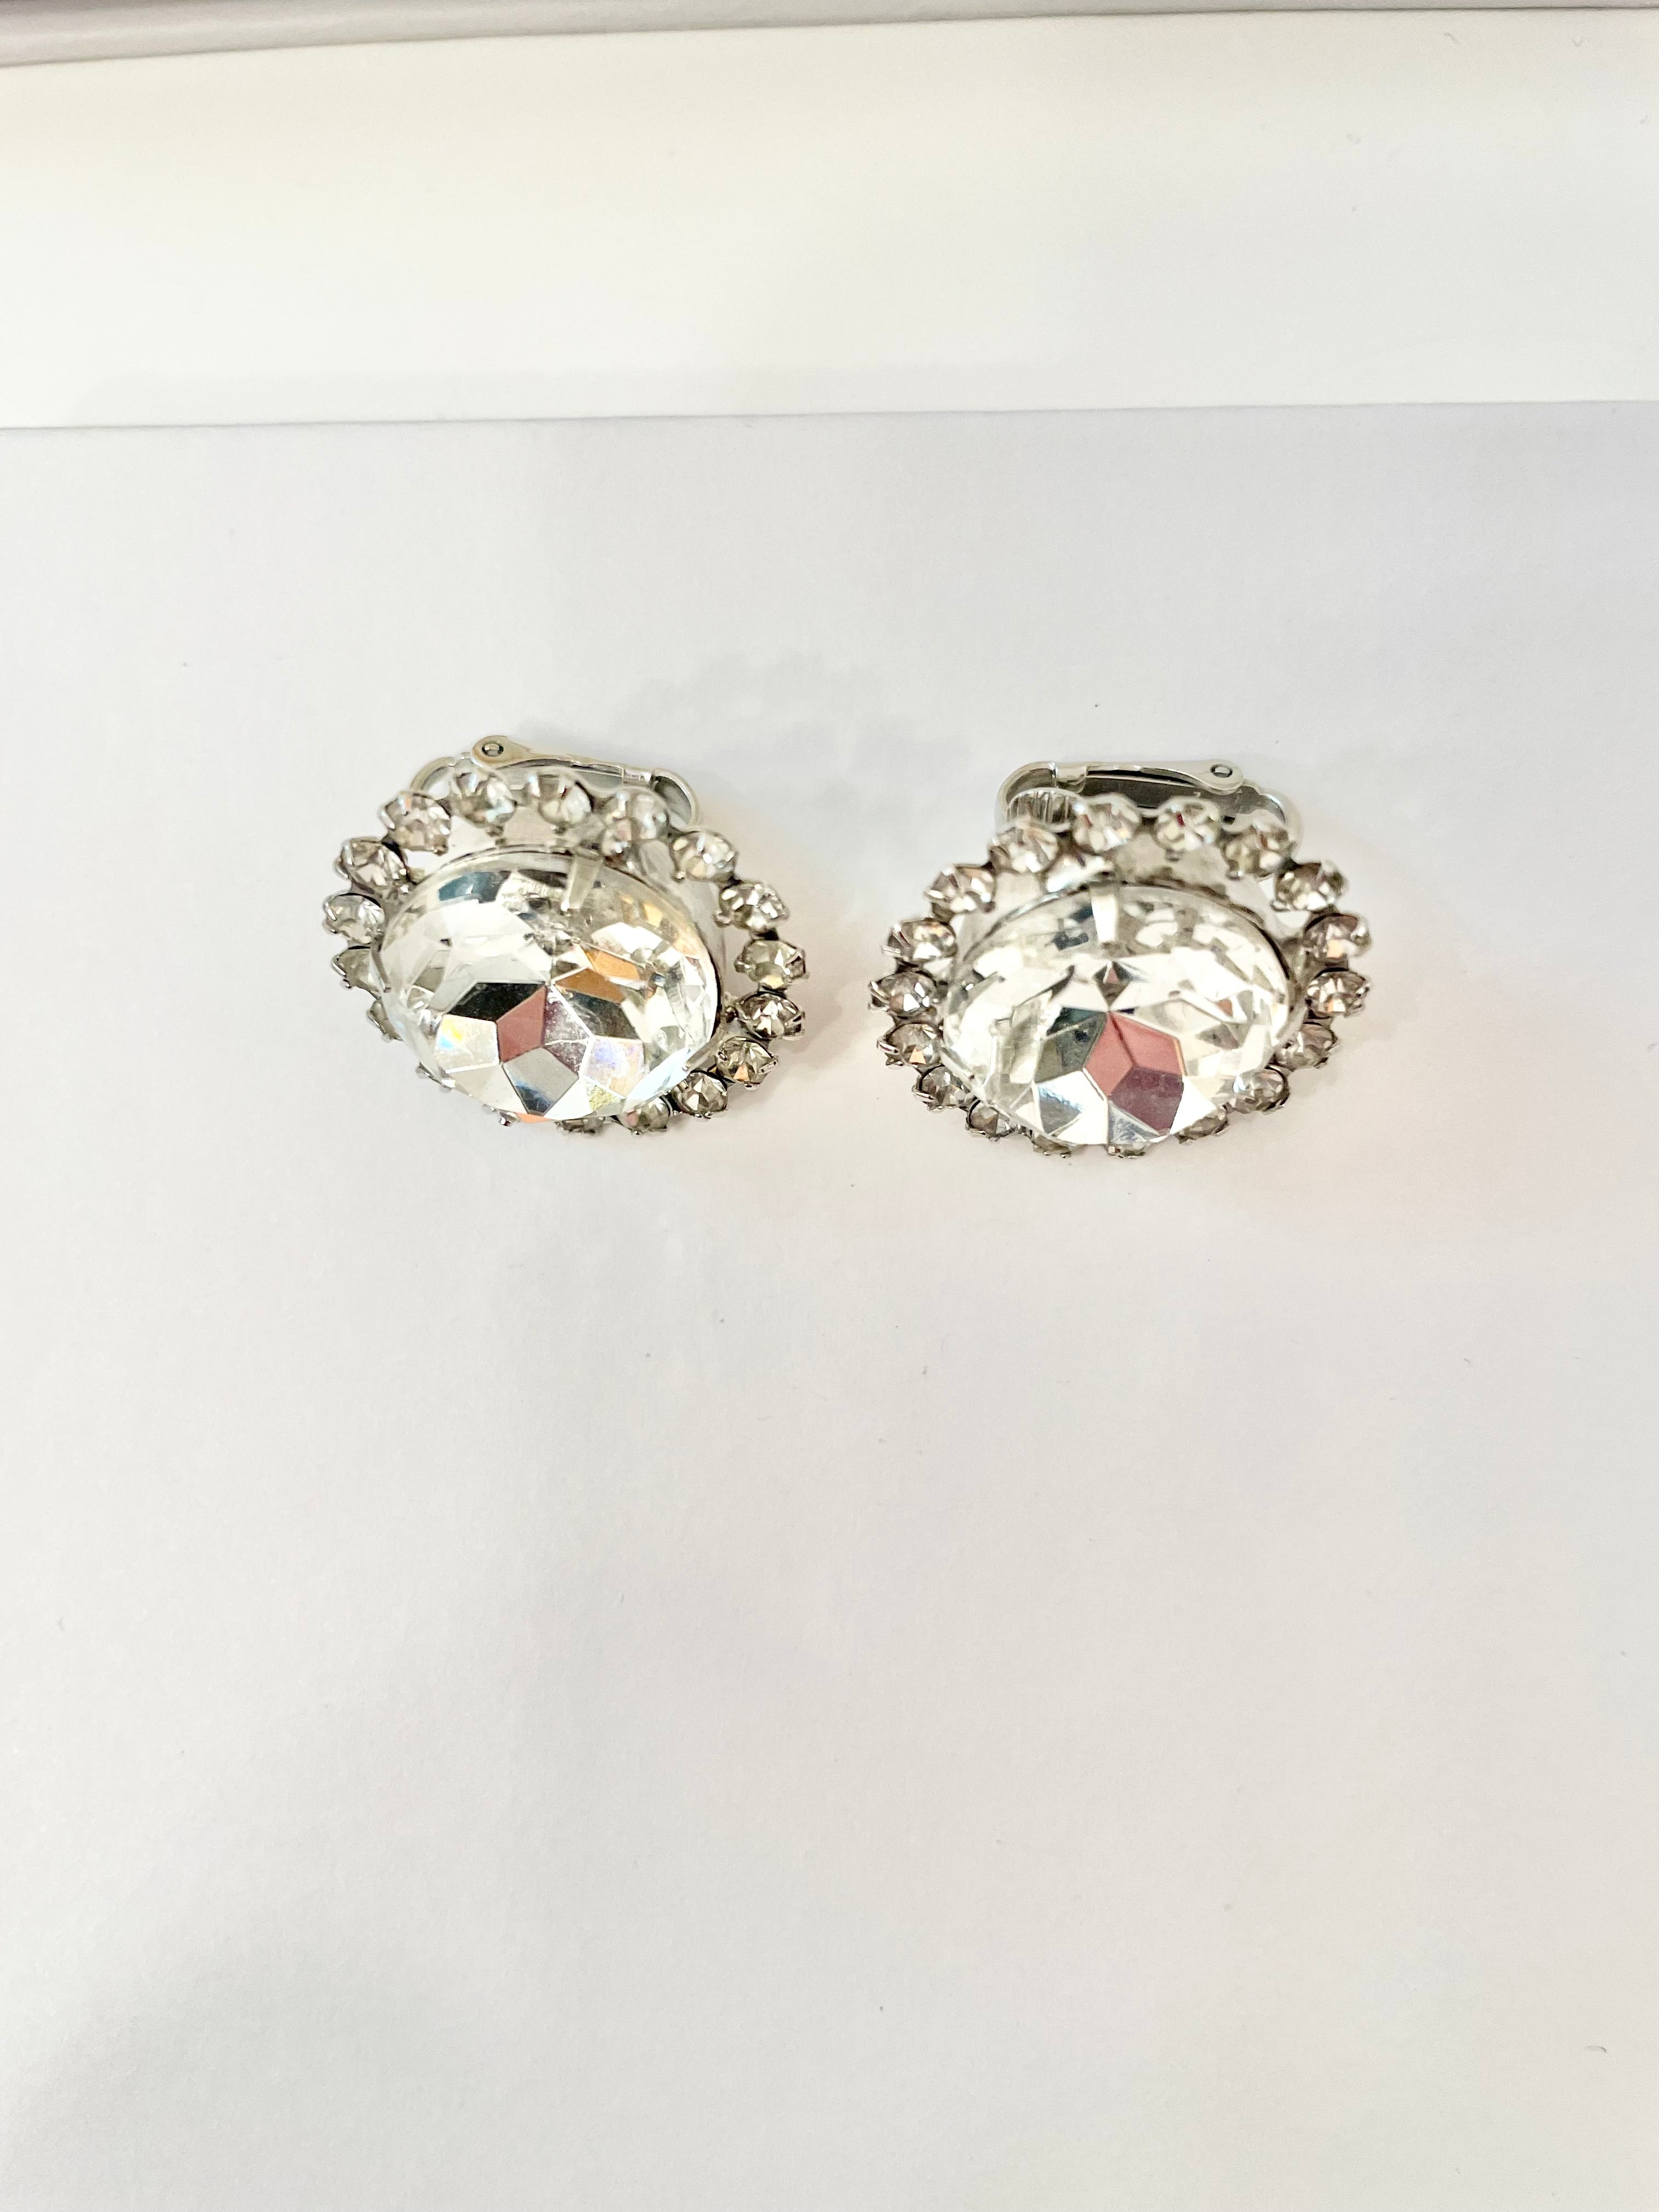 The heiress and her love of the brilliant cut diamond! These 1960's stunners are a must for any lady!!